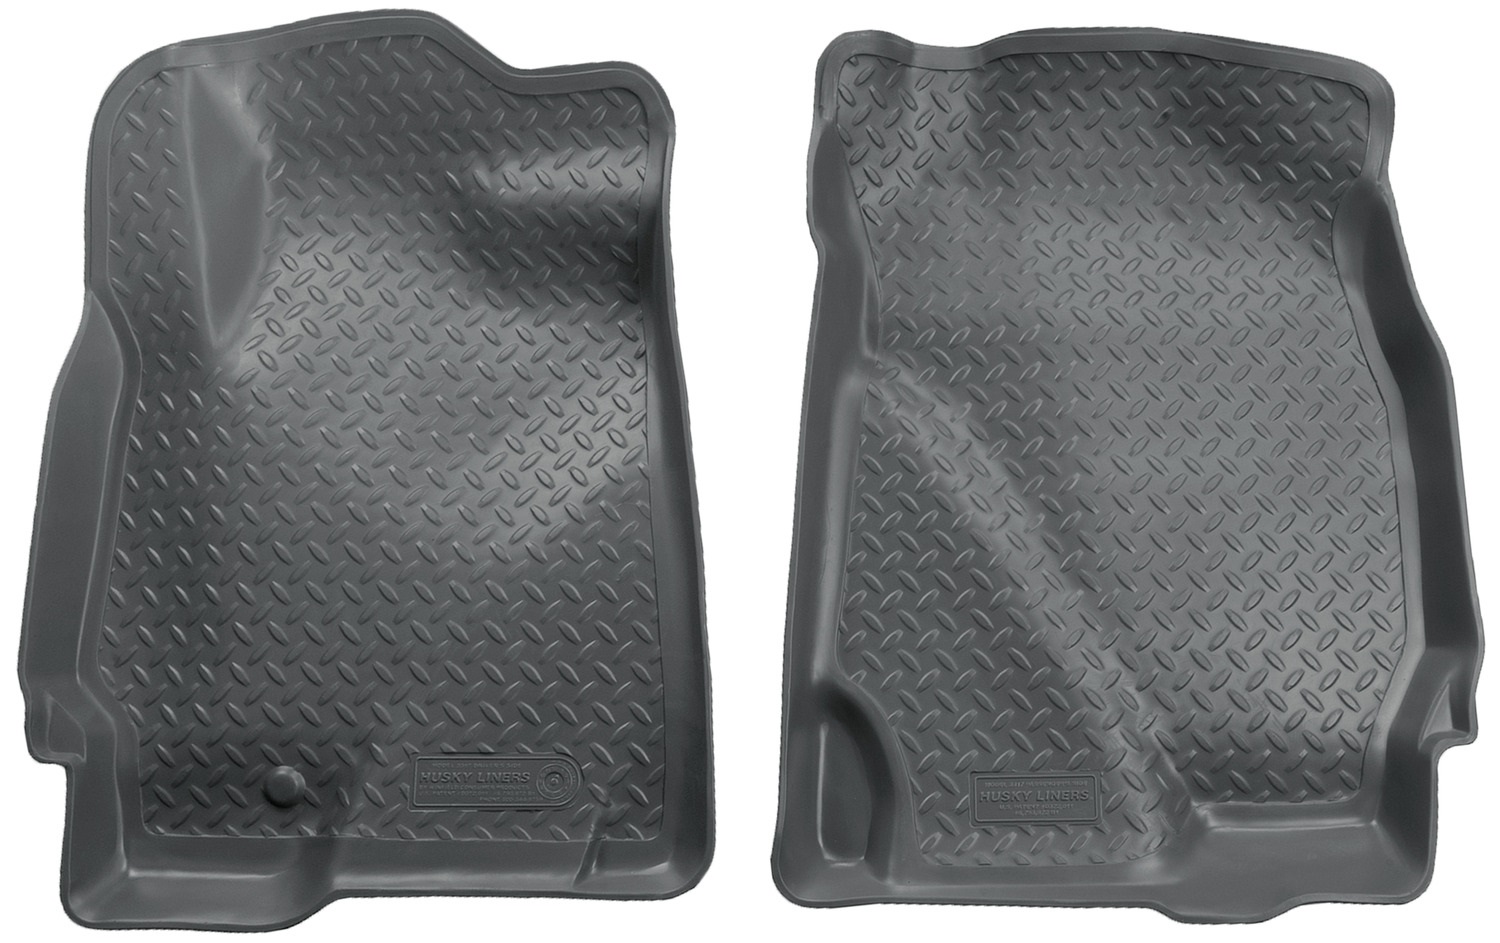 Husky Liners Husky Liners 33172 Classic Style; Floor Liner Fits 05-08 Escape Mariner Tribute